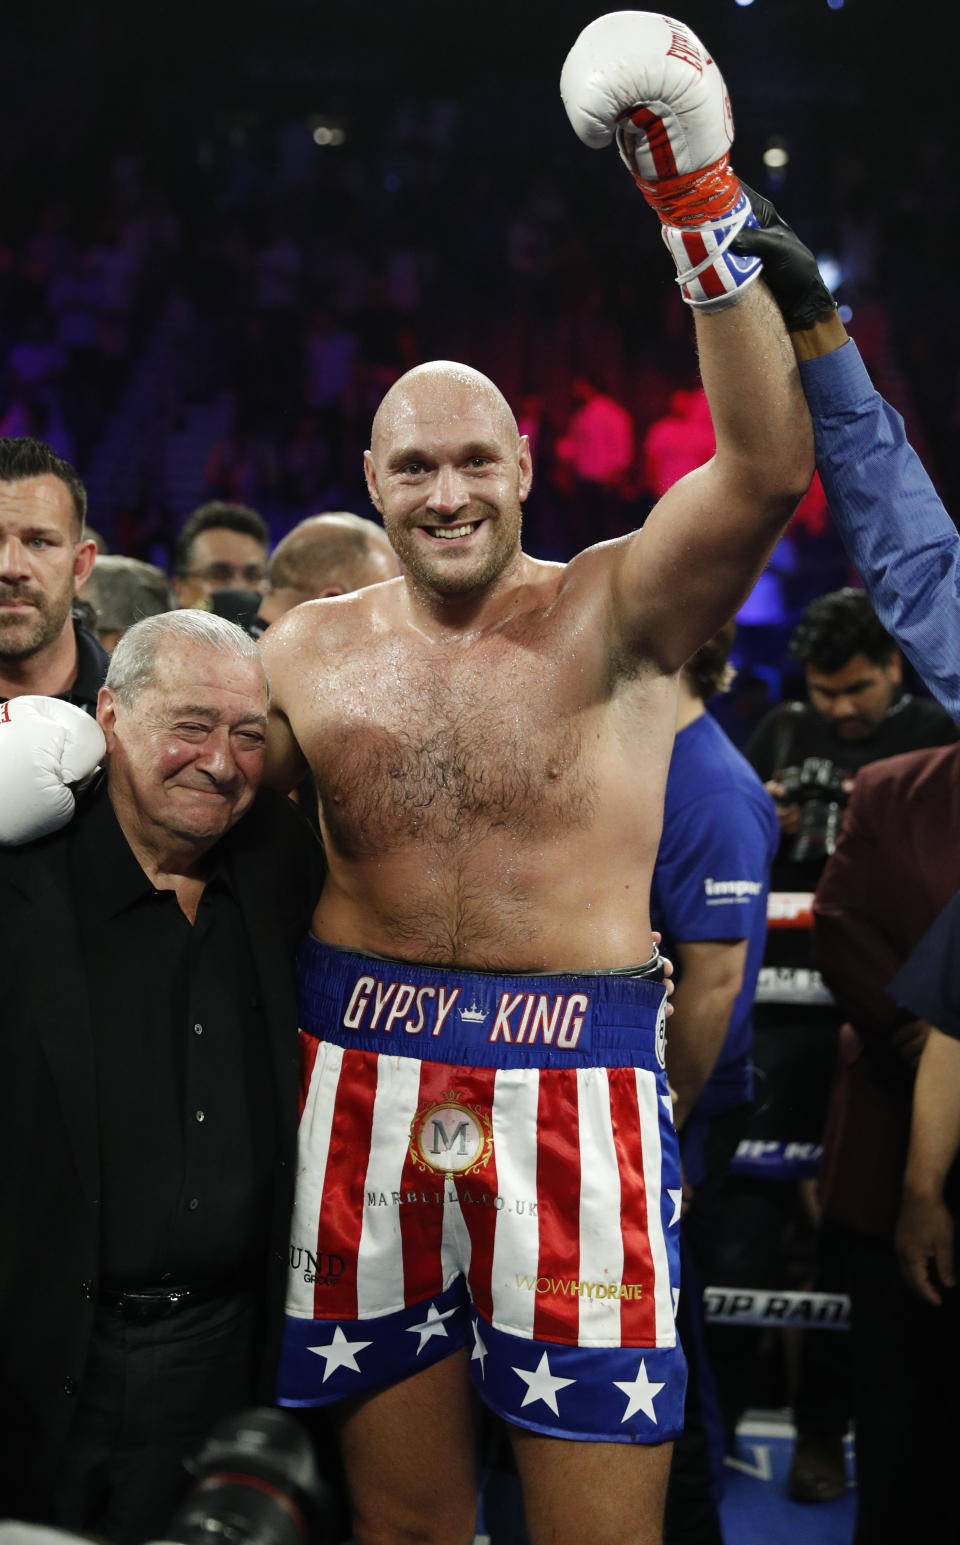 Tyson Fury, of England, poses for photographers after defeating Tom Schwarz, of Germany, during a heavyweight boxing match Saturday, June 15, 2019, in Las Vegas. (AP Photo/John Locher)